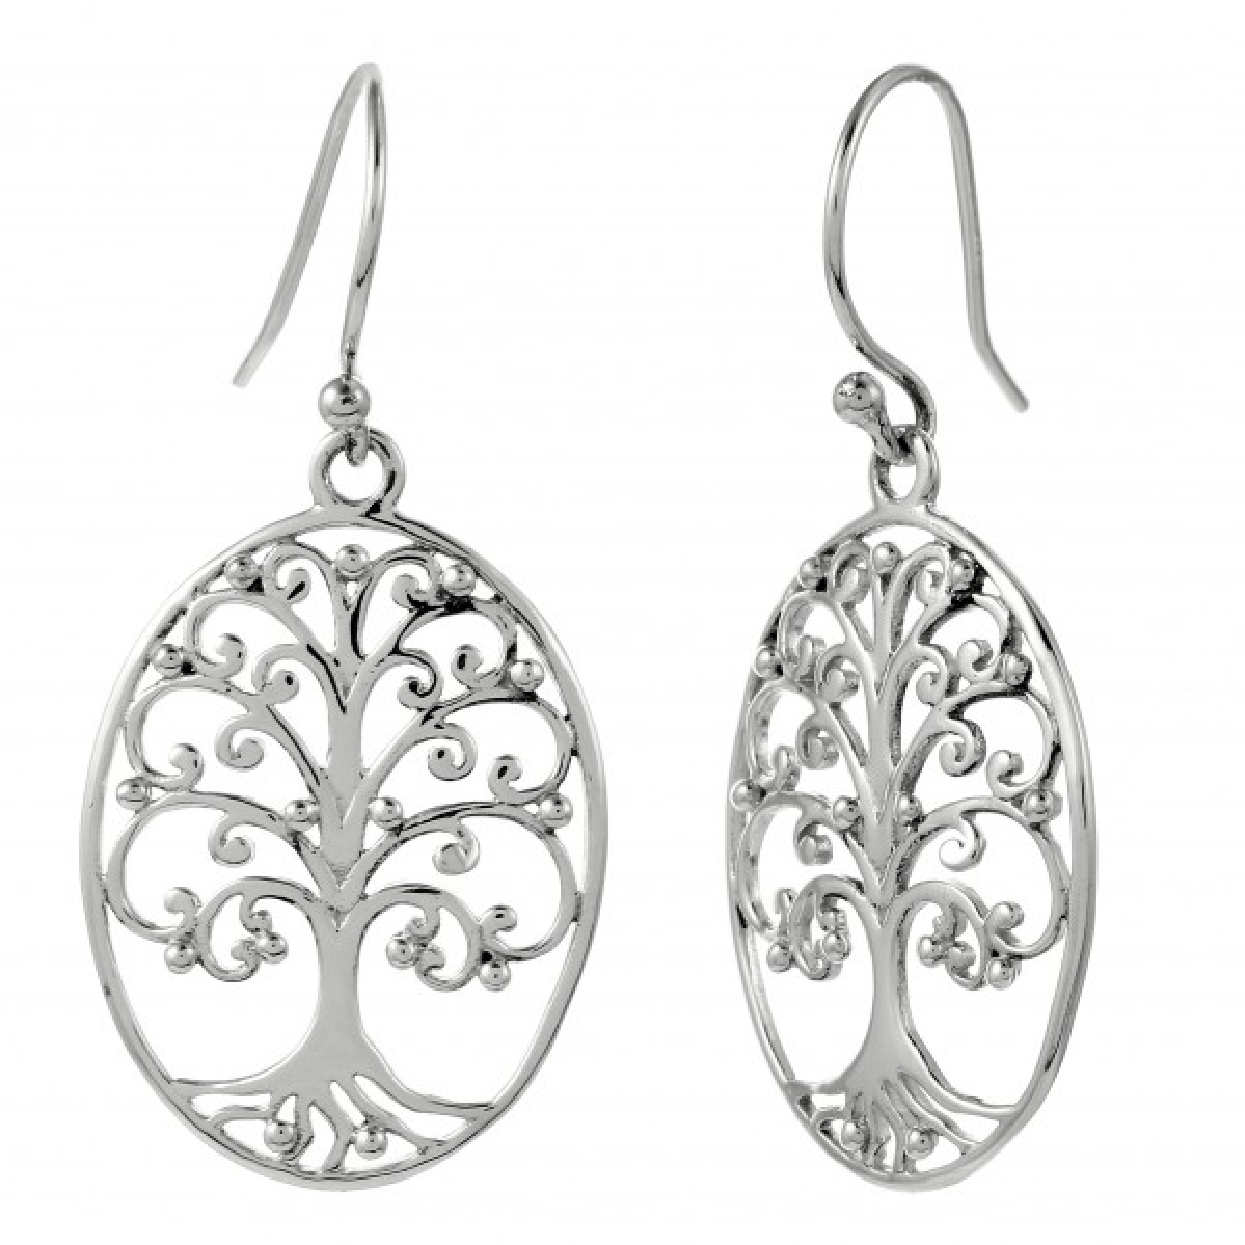 Sterling Silver Southern Gates Small Live Oak Oval earrings. 2-1/8   high by 3/4   wide (approx.)

E379